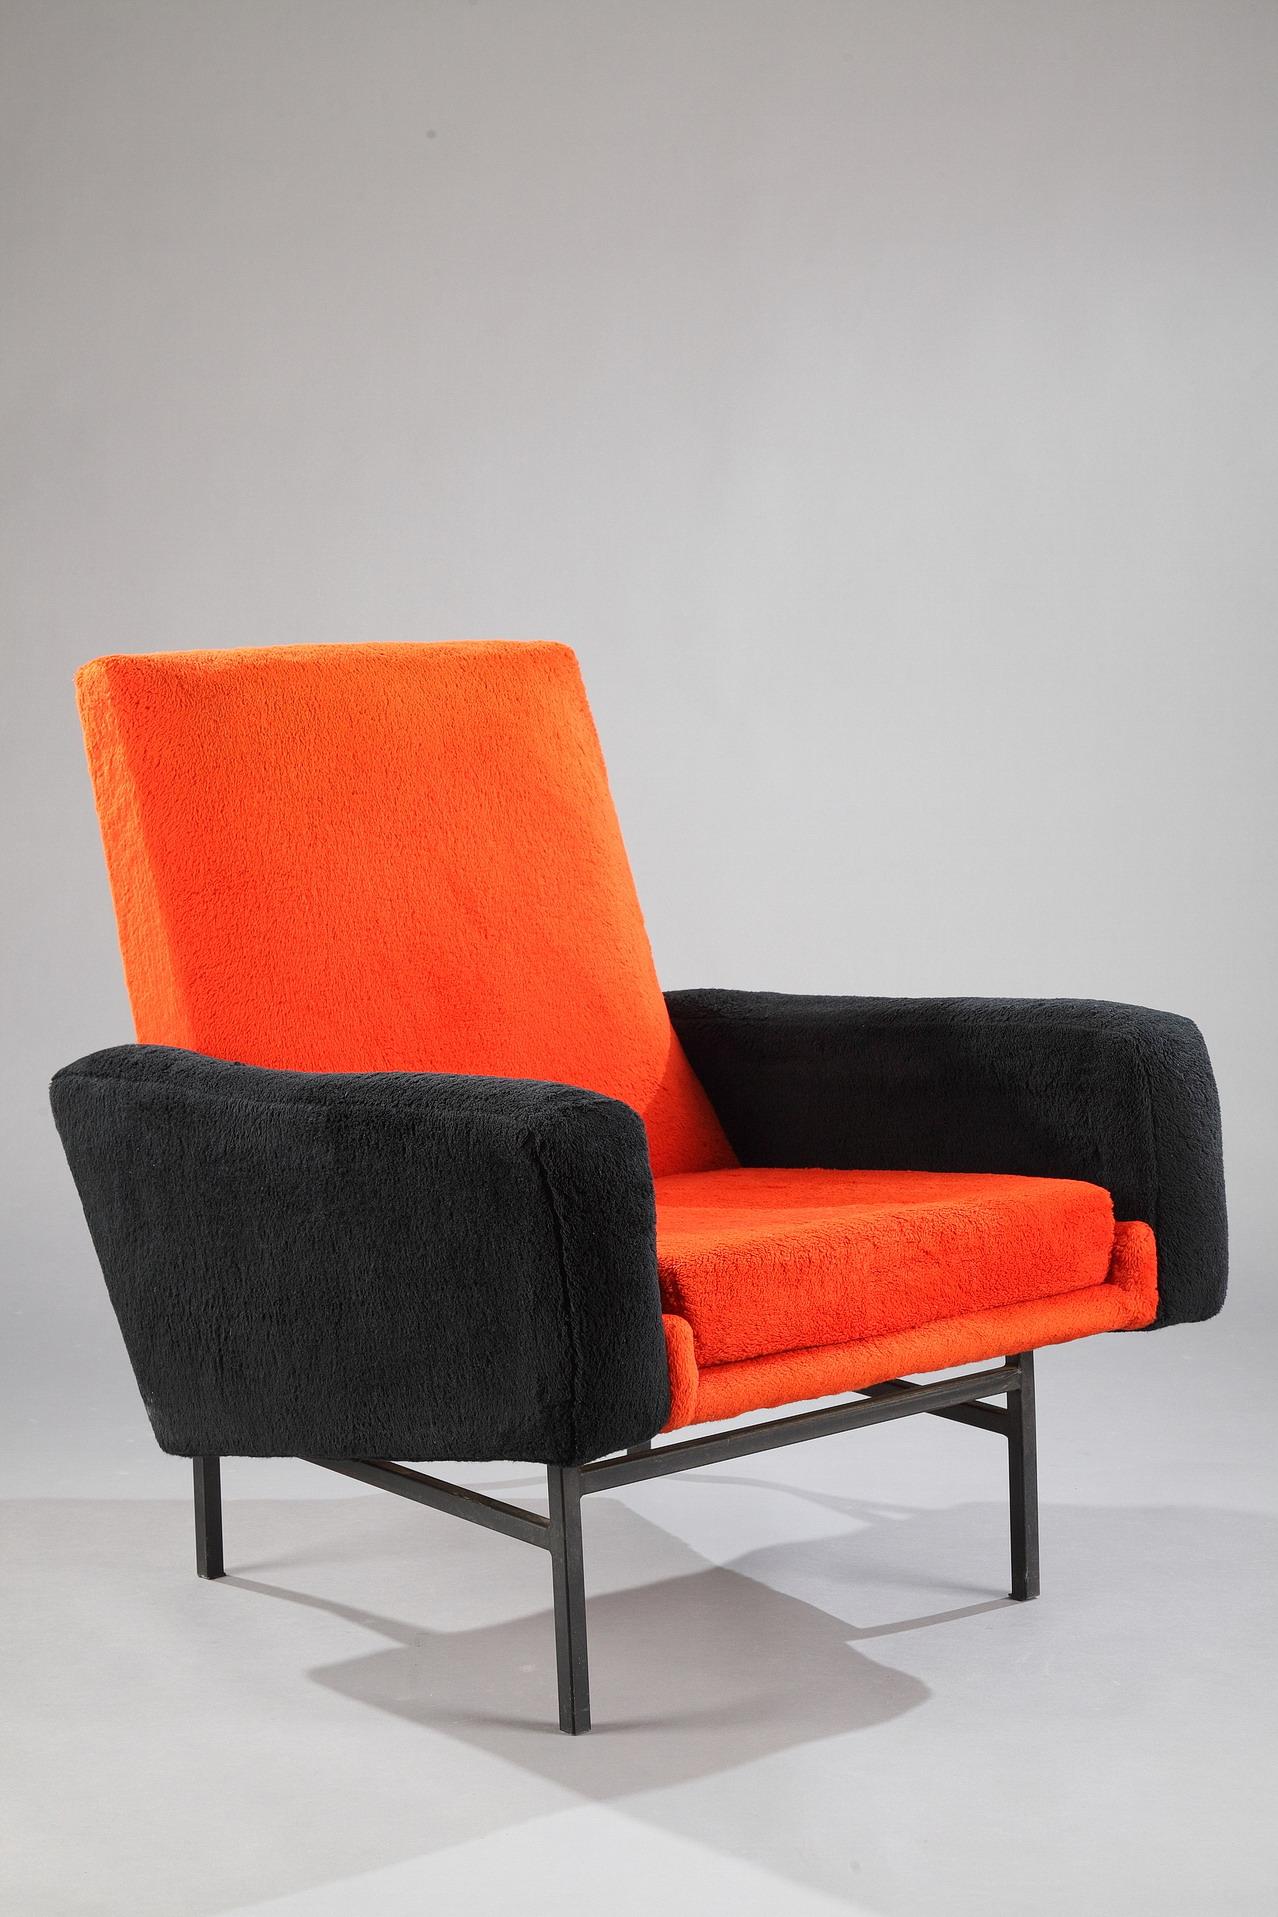 A pair of 642 A.R.P. (Research Plastic Studio, a group composed of three designers: Motte, Mortier & Guariche) armchairs edited by Steiner during the 1950s. Black lacquered metal feet and structure covered with a black and orange wollen upholstery.